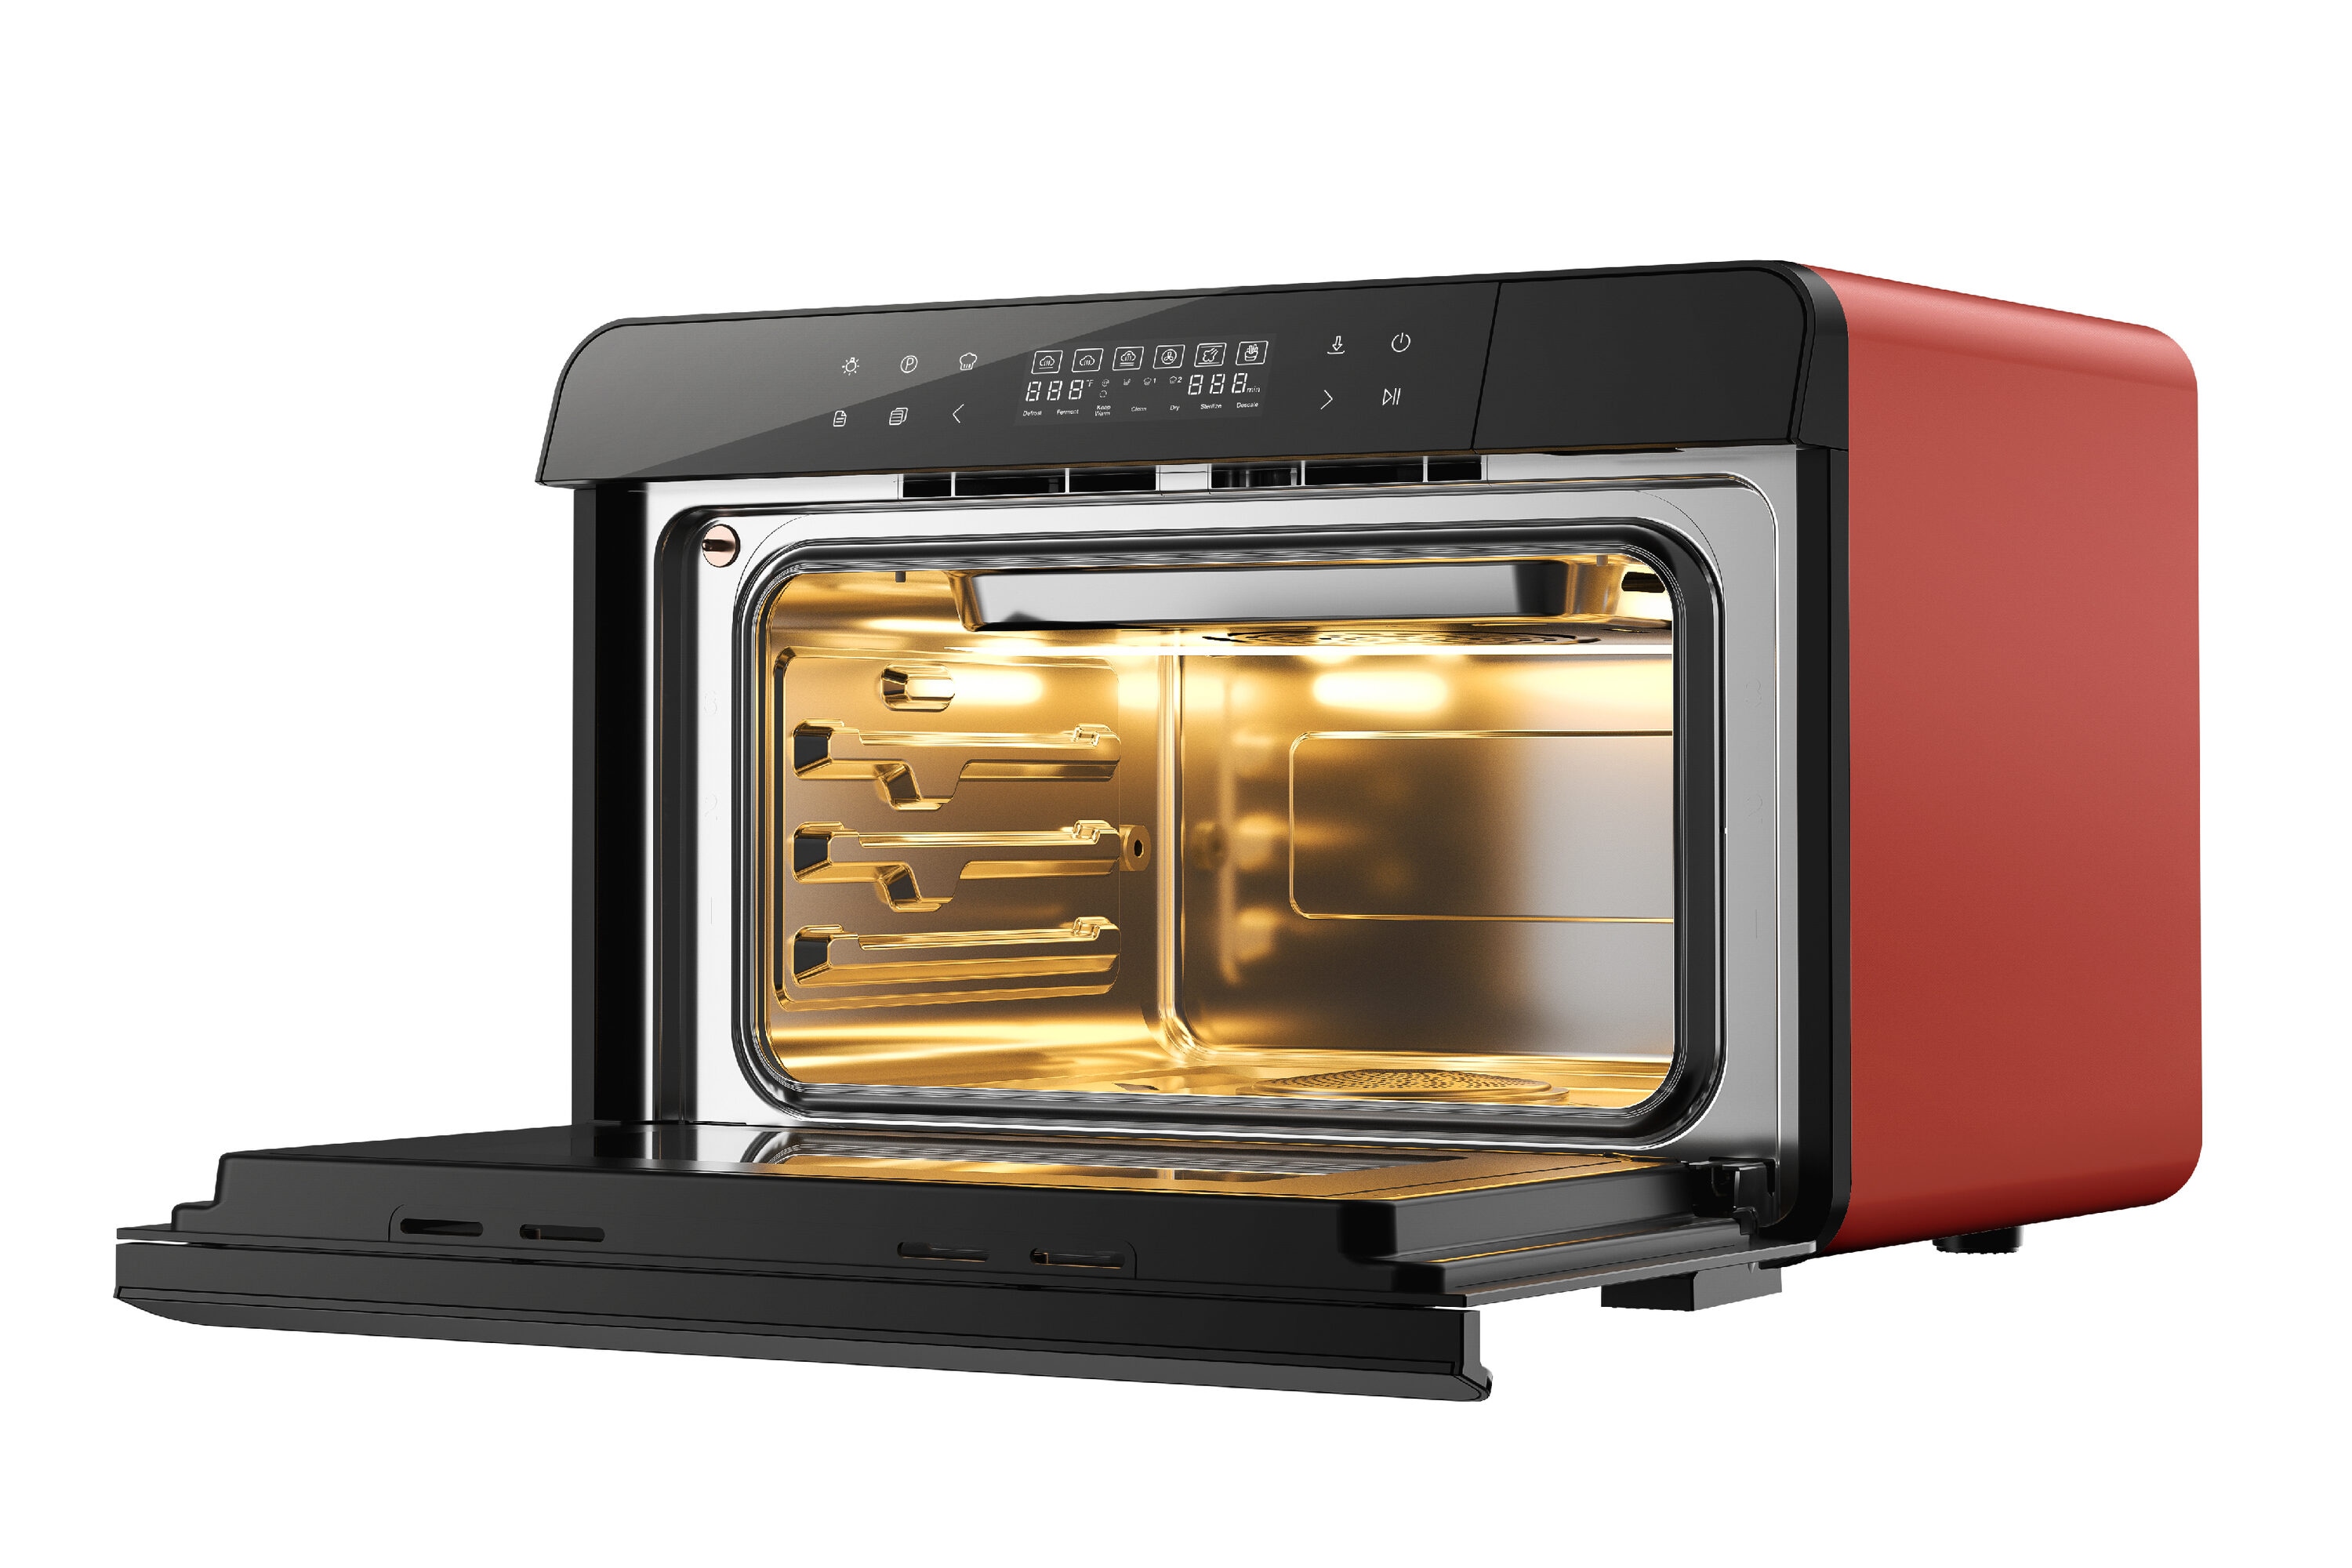 Accessories for ChefCubii Steam-Combi Ovens